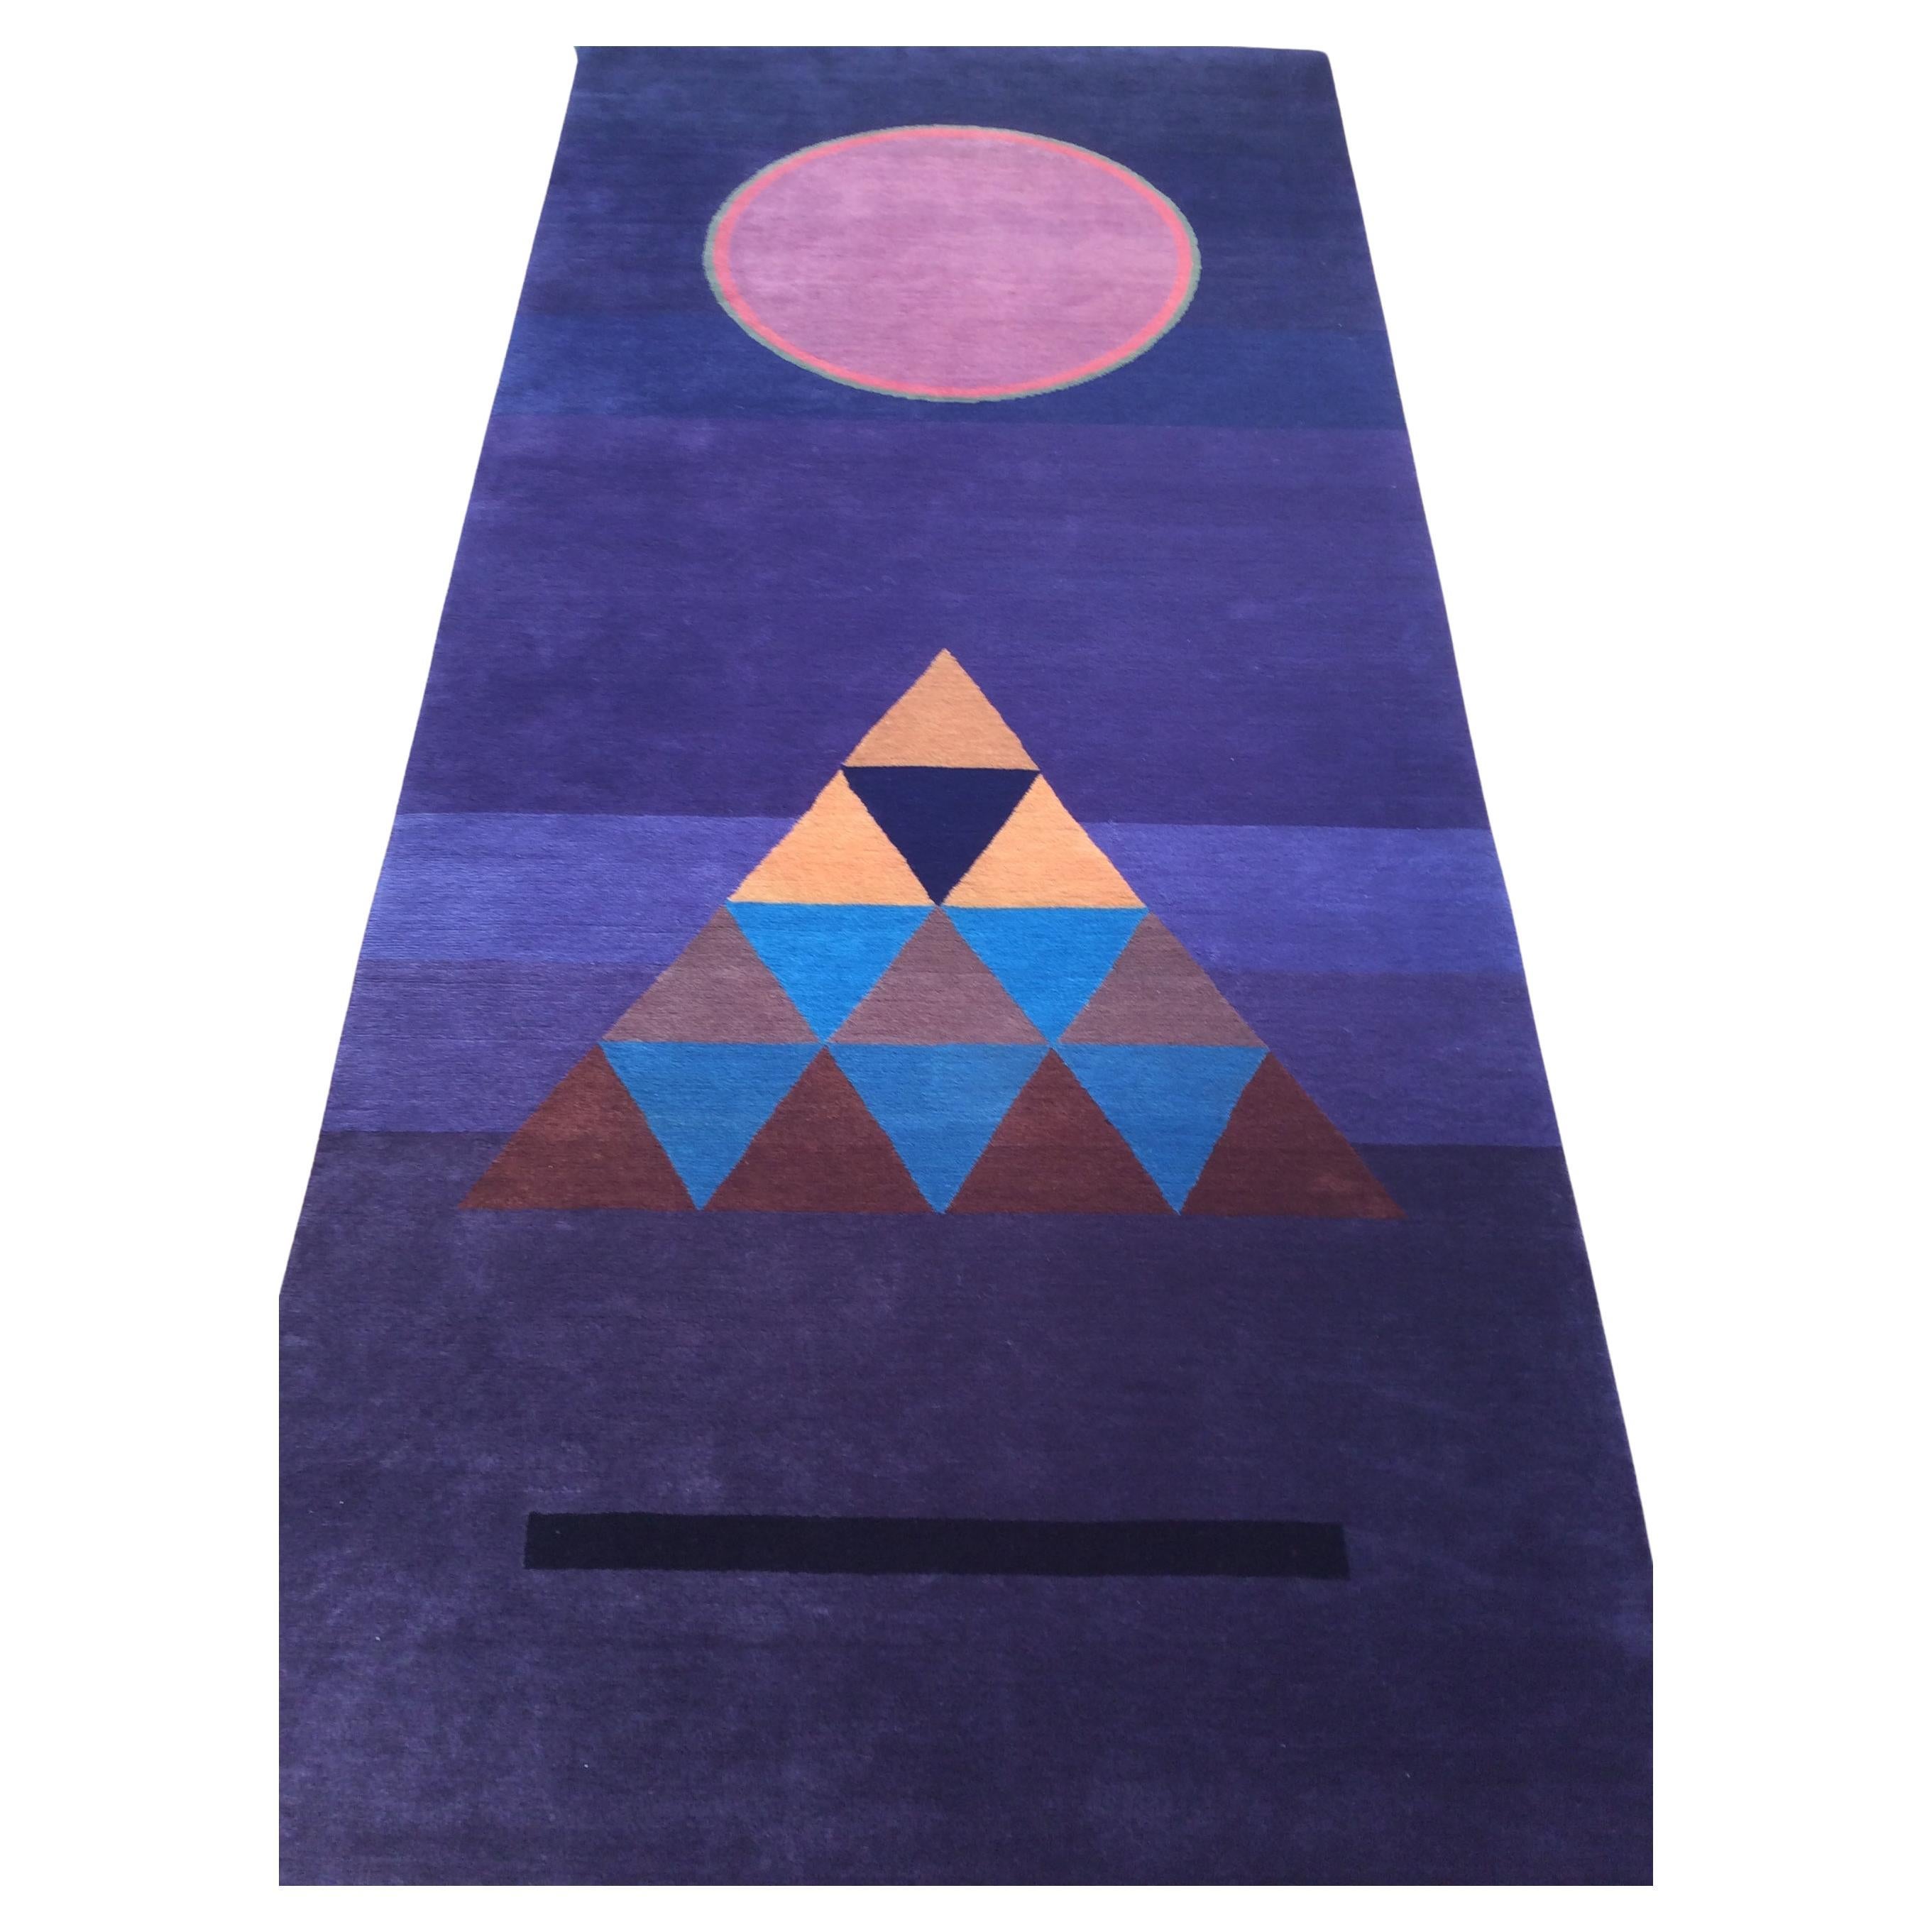 Bauhaus Custom Hand knotted Rug: “Conclusion